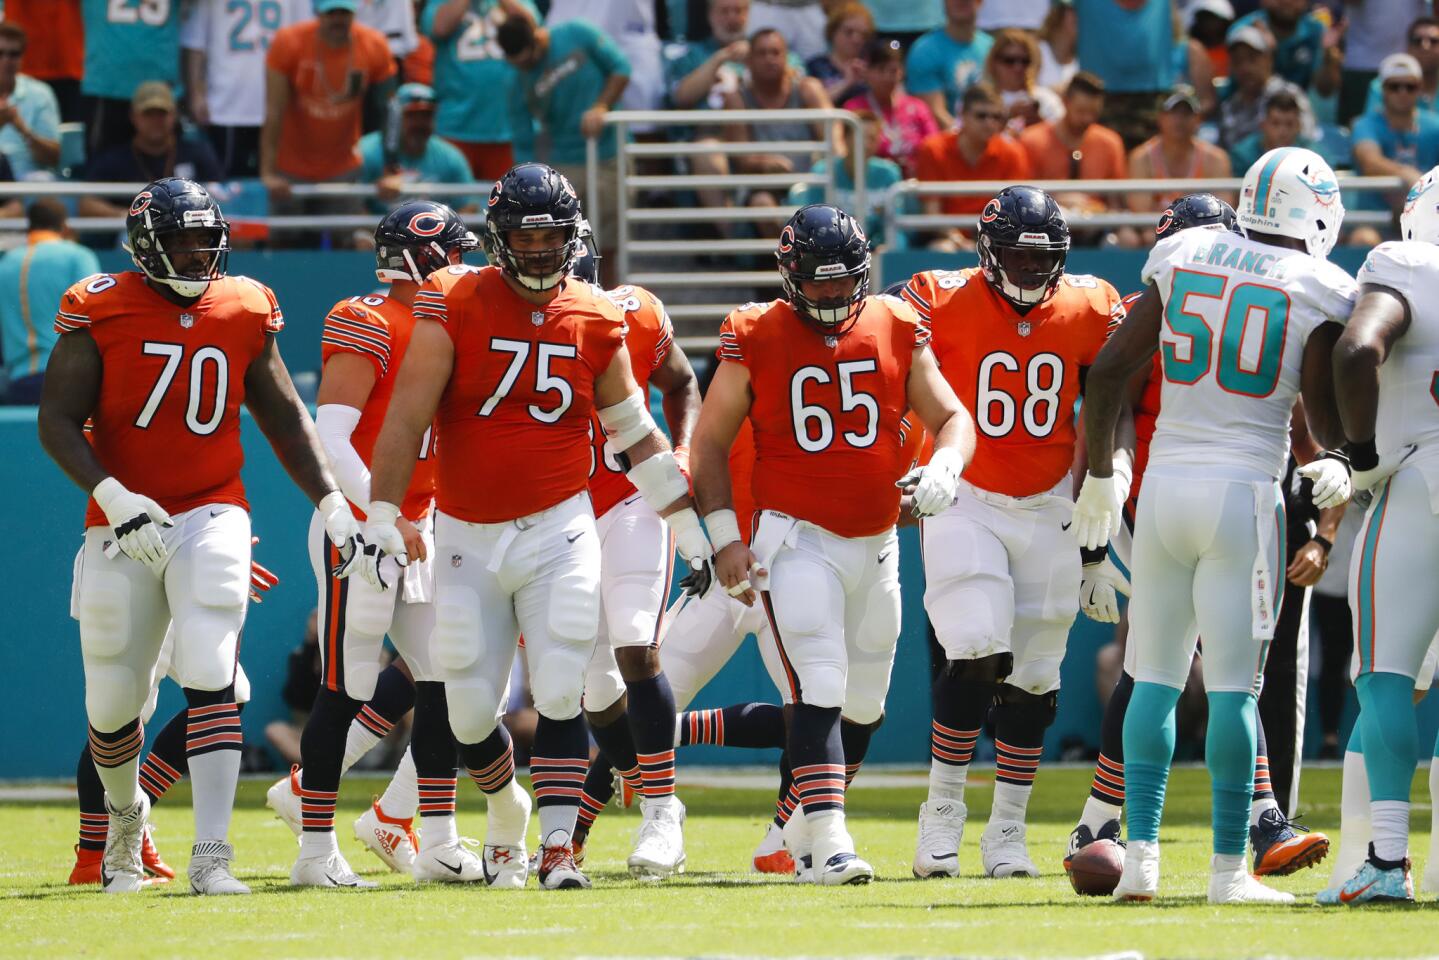 Bears offensive linemen Bobby Massie, from left, Kyle Long, Cody Whitehair and James Daniels in the first quarter against the Dolphins at Hard Rock Stadium in Miami Gardens, Fla., on Oct. 14, 2018.